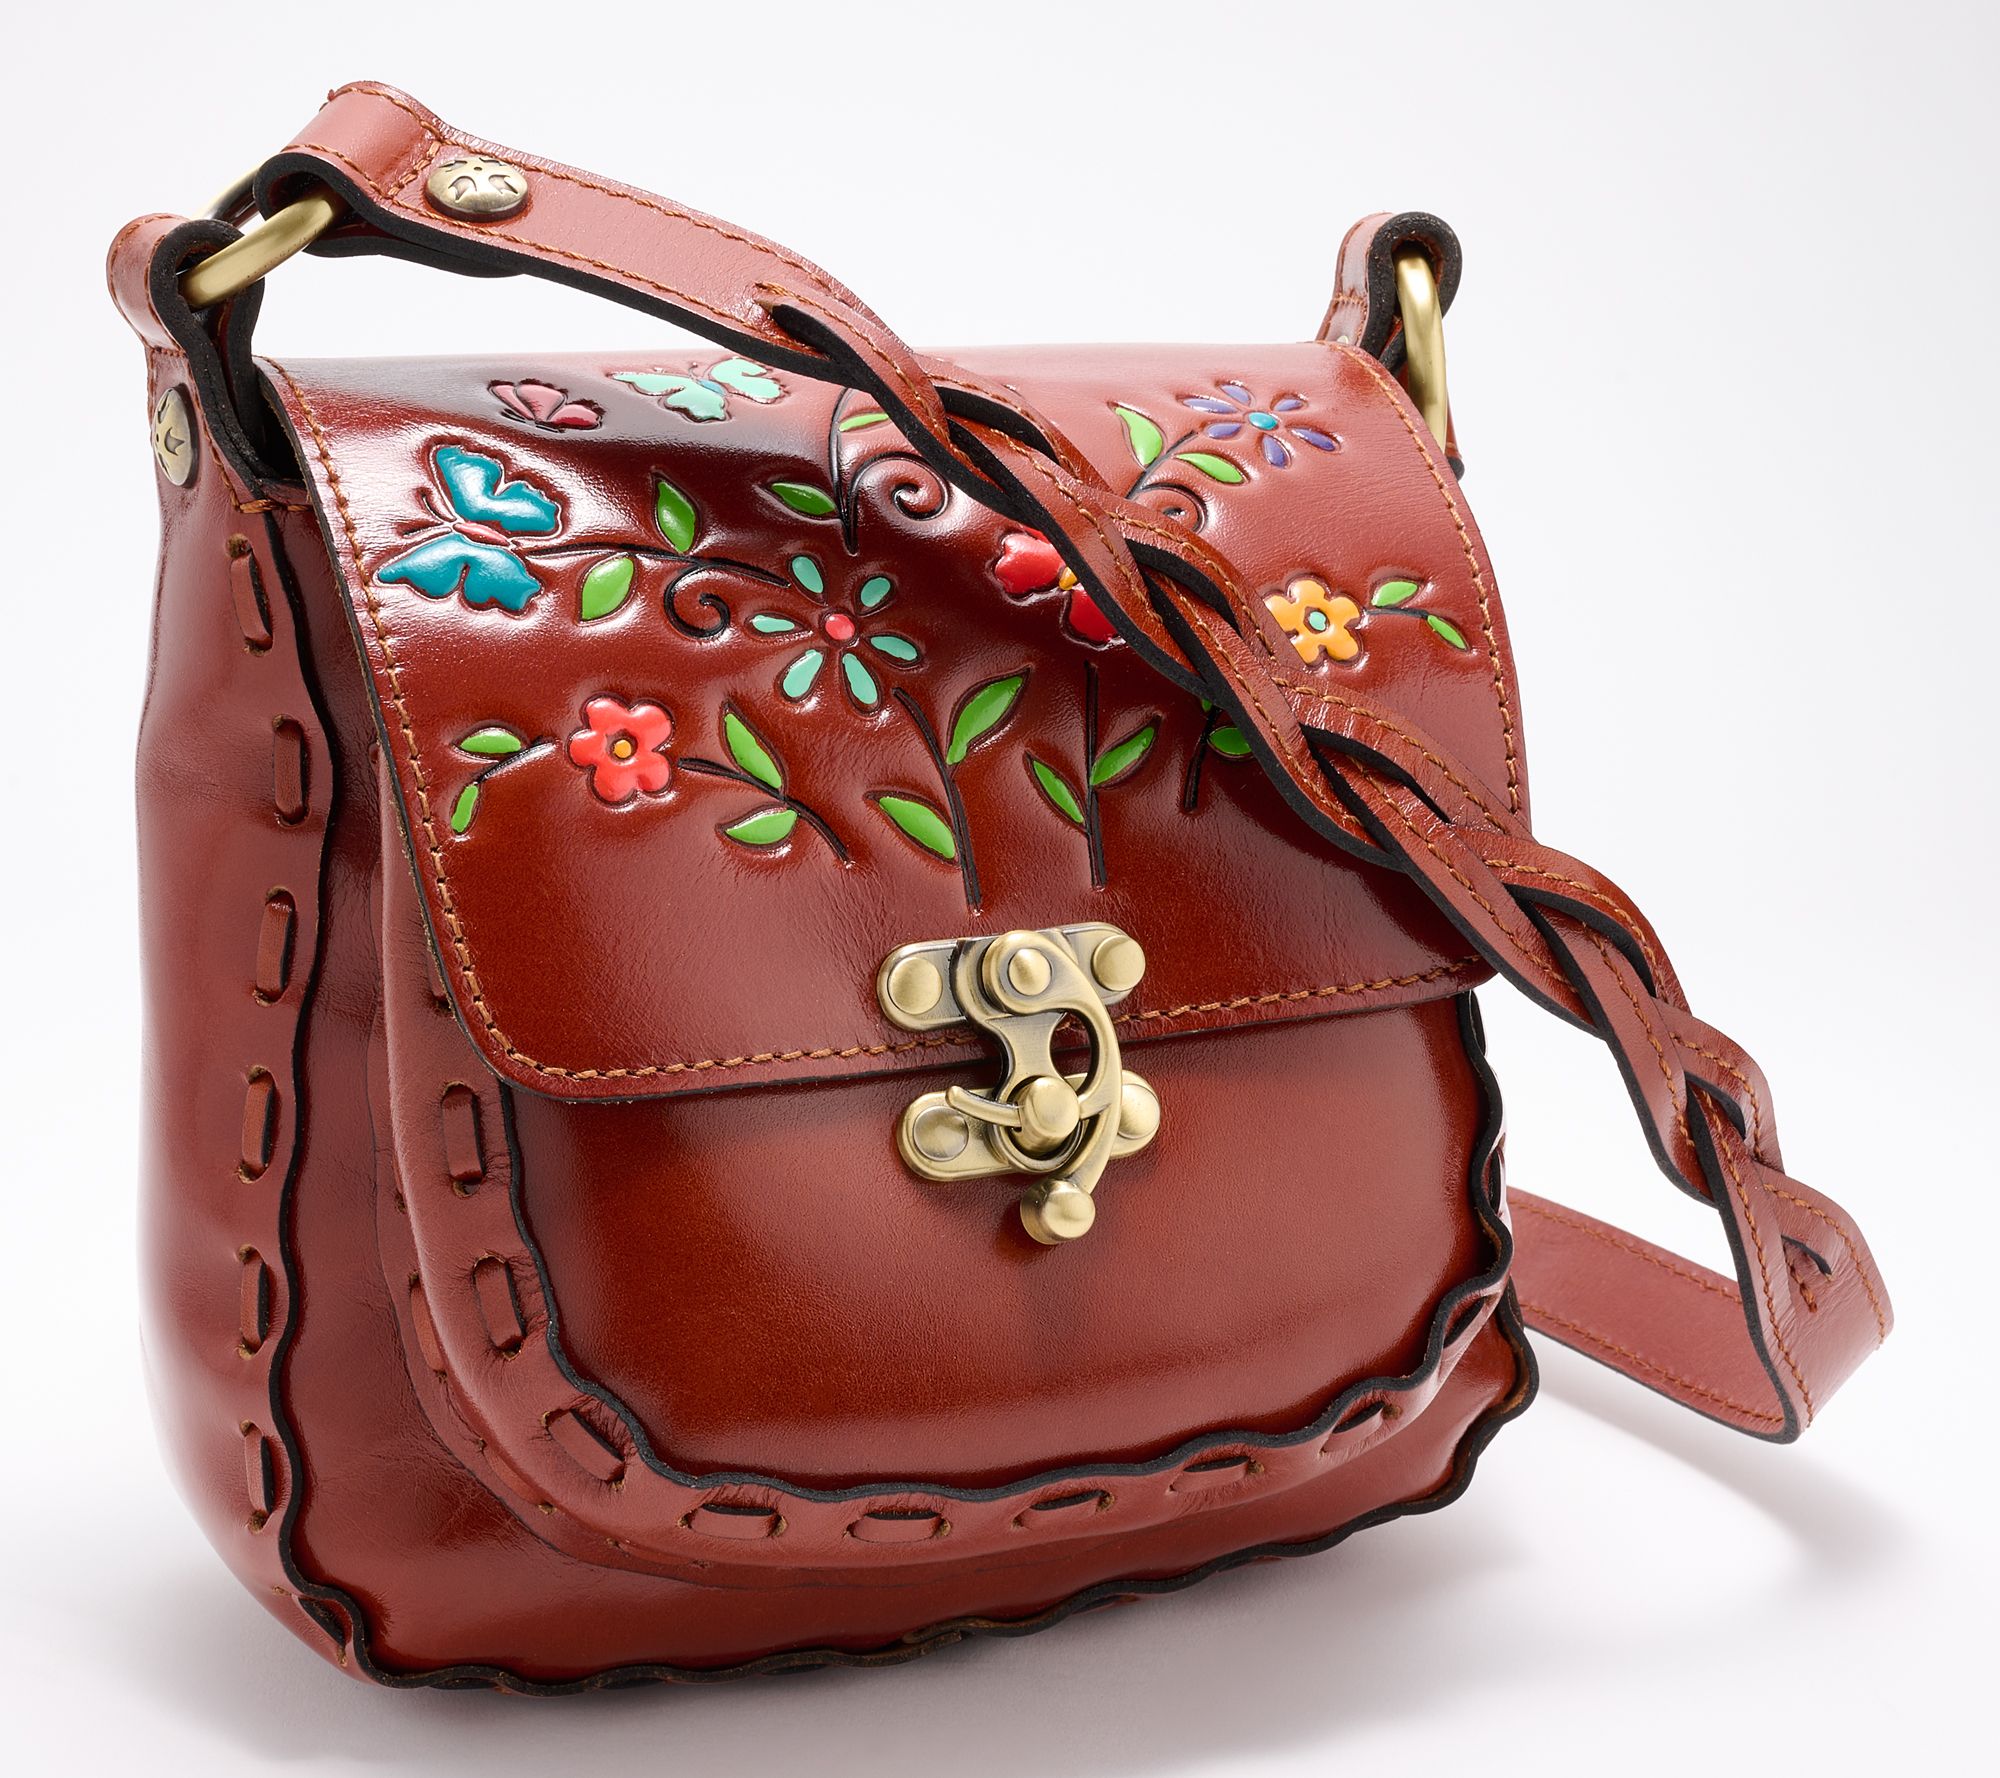 Butterfly Garden Embroidered Purse - Red